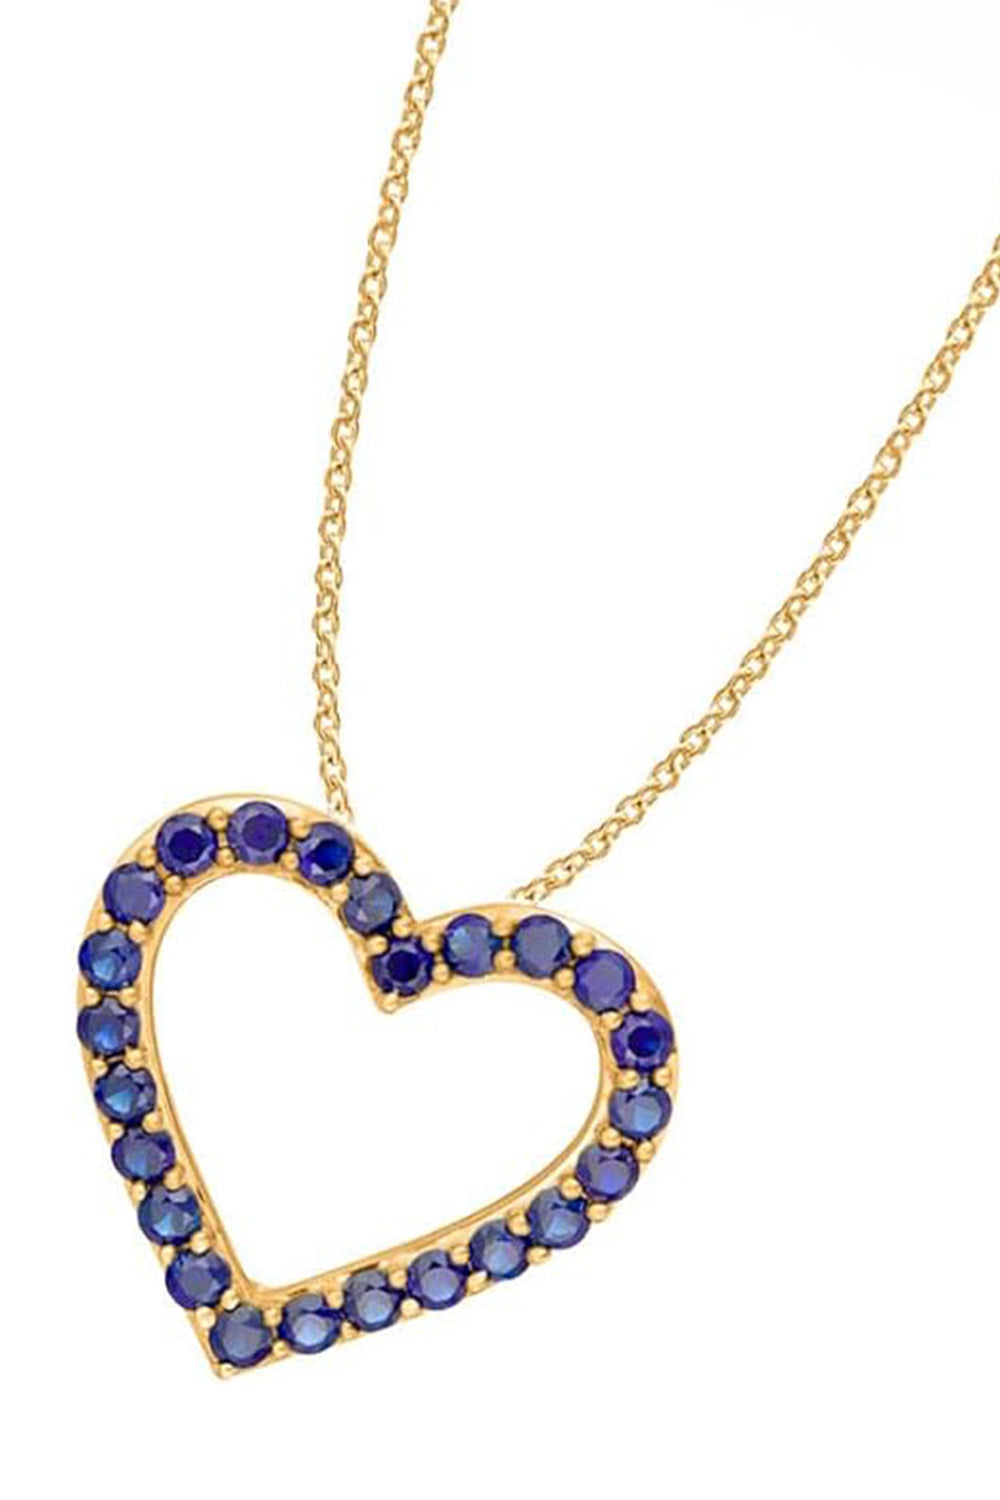 Yellow Gold Chain with Blue Sapphire Open Heart Pendant